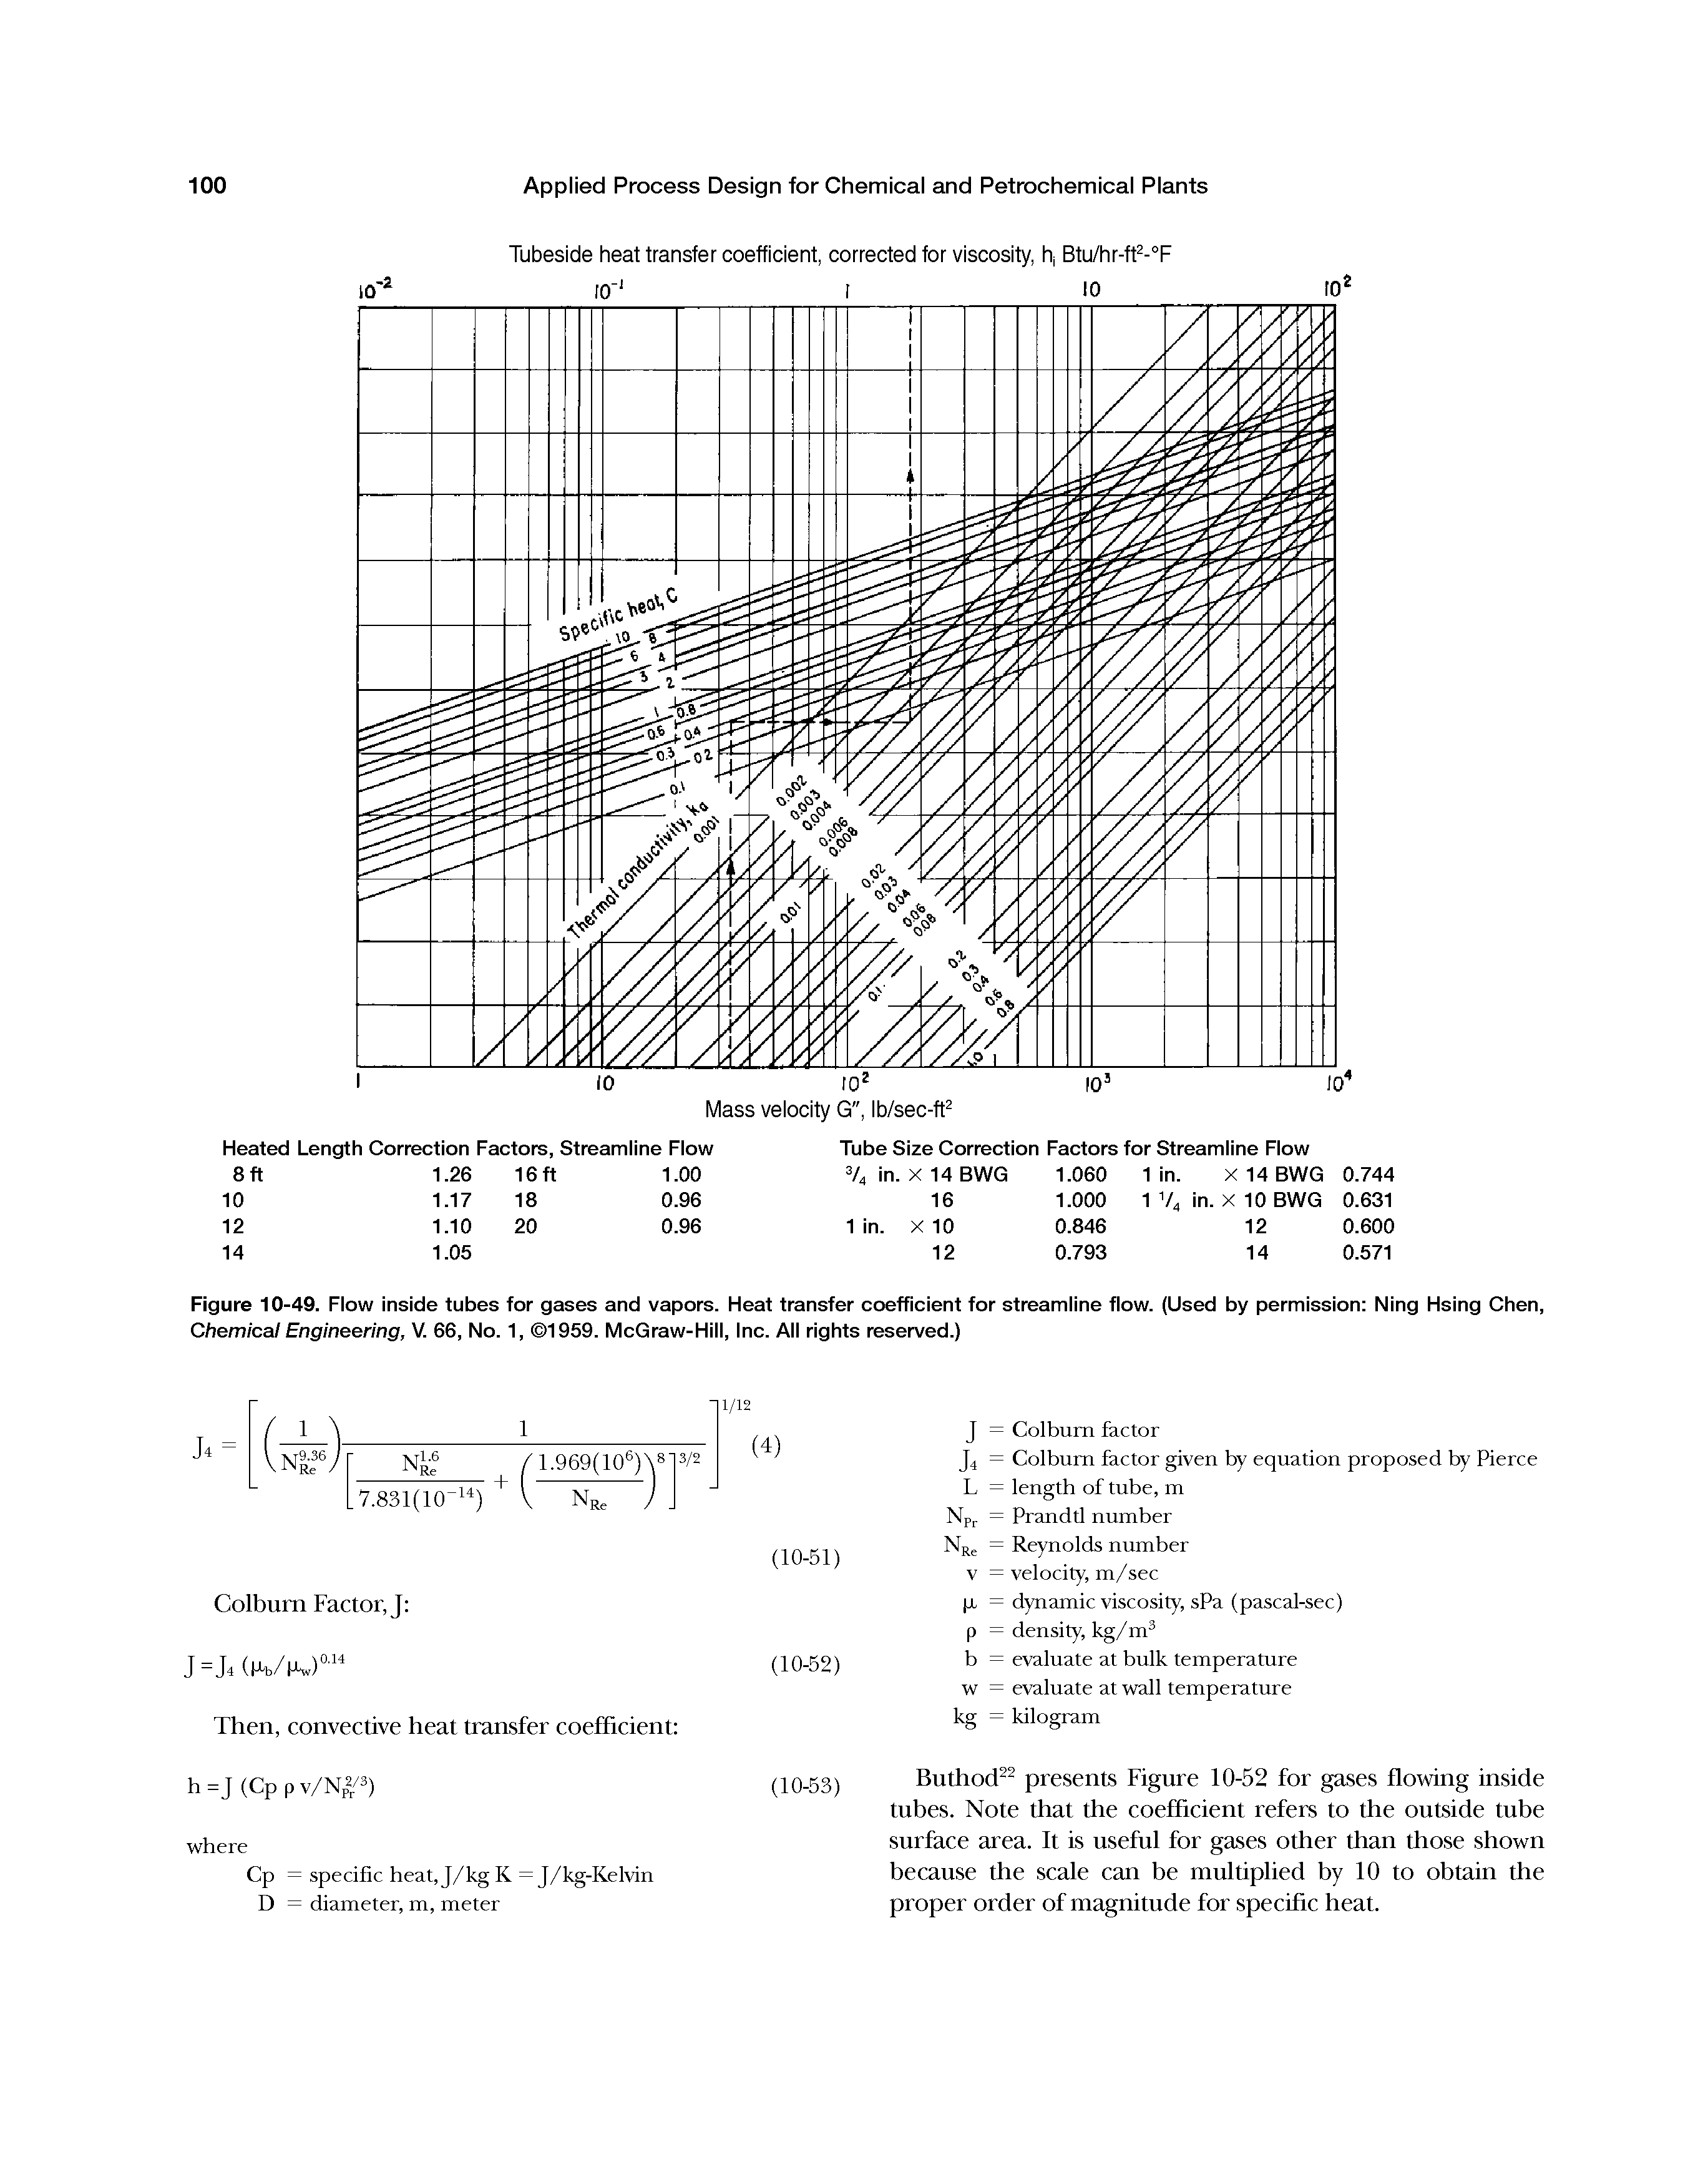 Figure 10-49. Flow inside tubes for gases and vapors. Heat transfer coefficient for streamline flow. (Used by permission Ning Hsing Chen, Chemical Engineering, V. 66, No. 1, 1959. McGraw-Hill, Inc. All rights reserved.)...